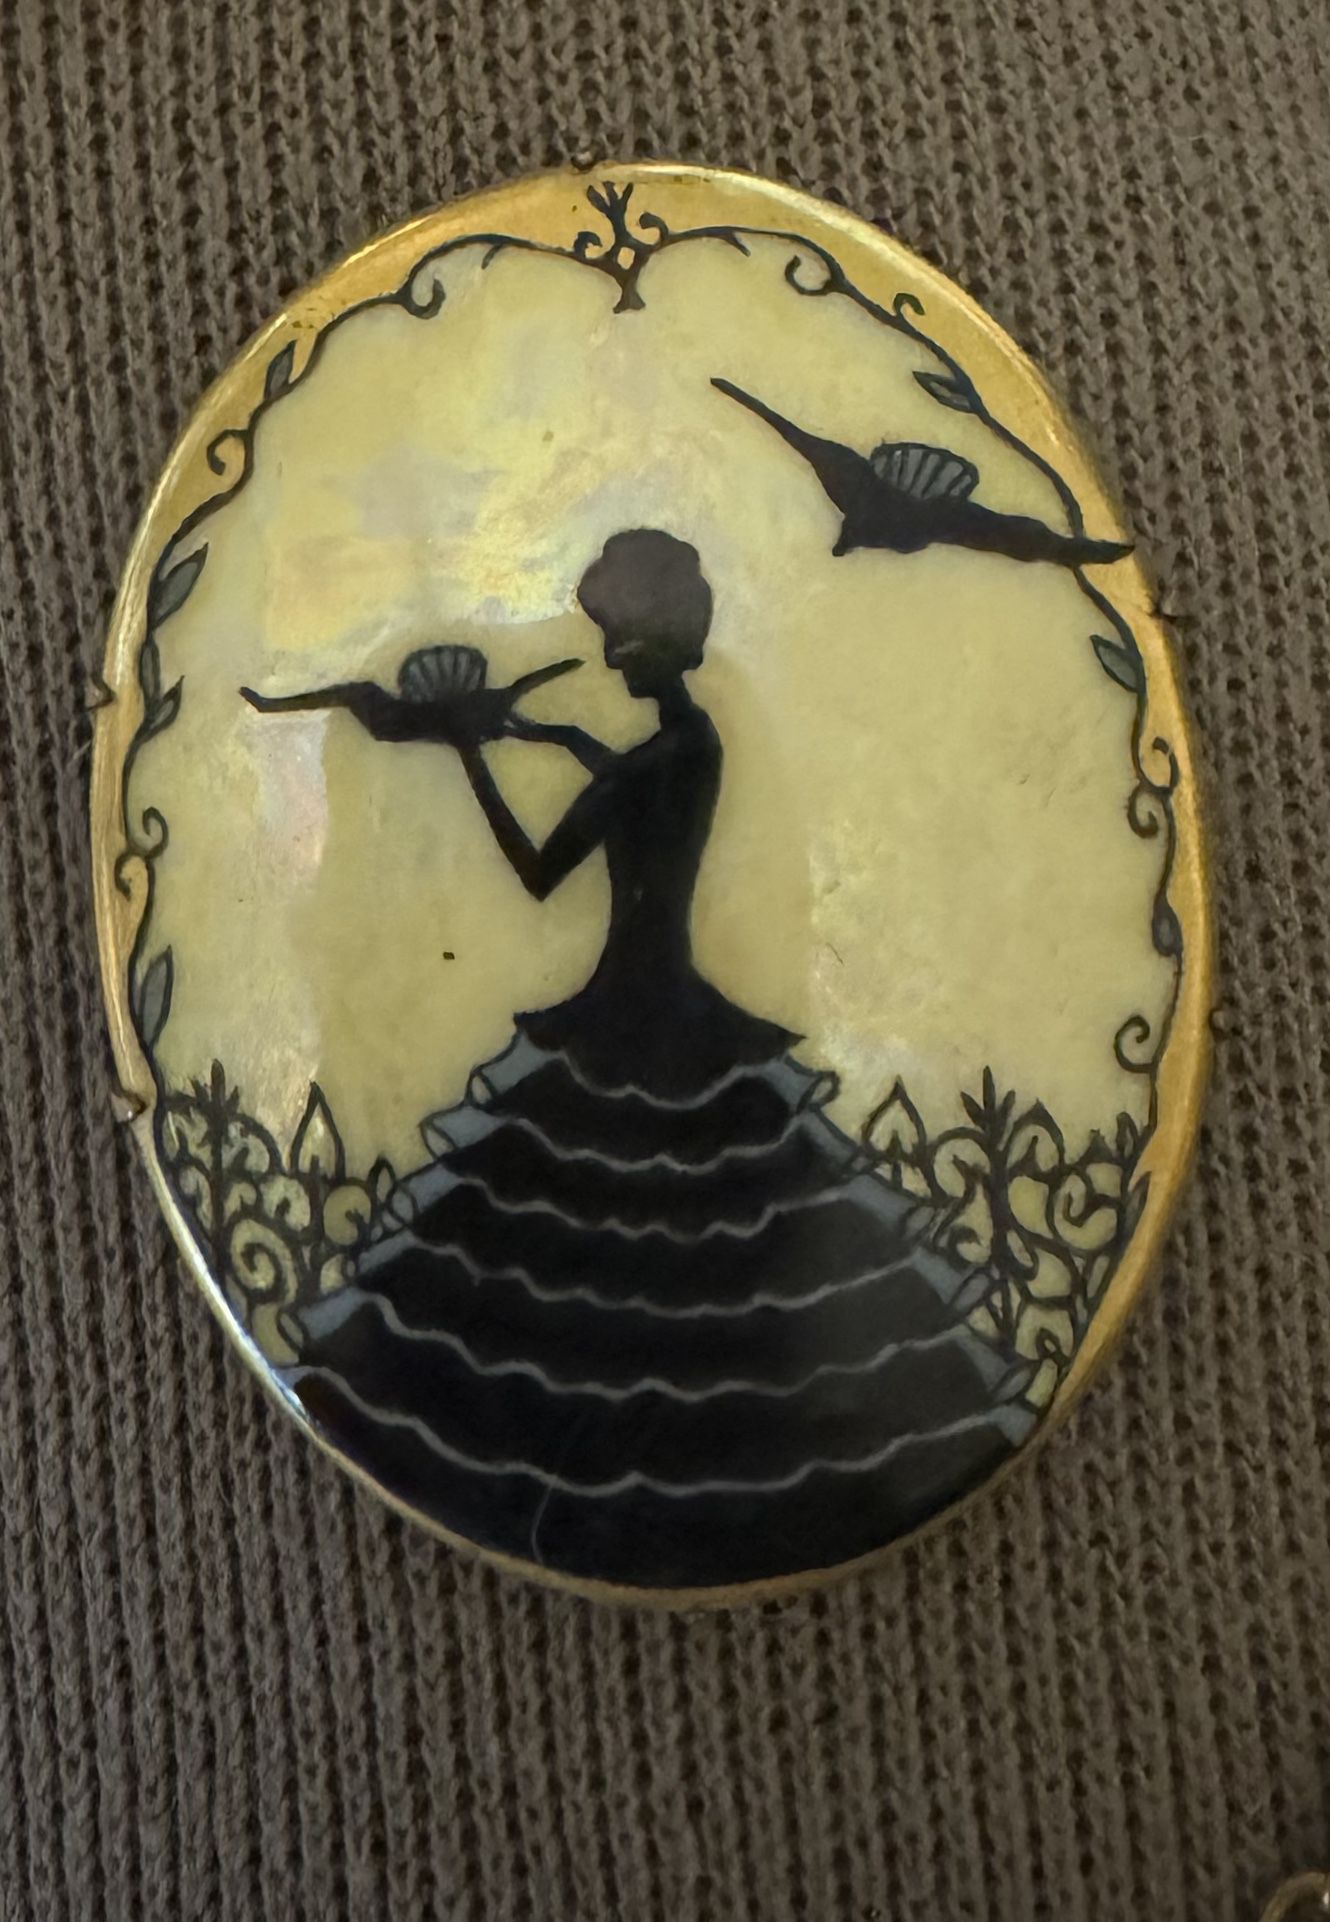 Antique Victorian Silhouette Portrait Brooch Hand Painted Luster Cameo Pin exc cond